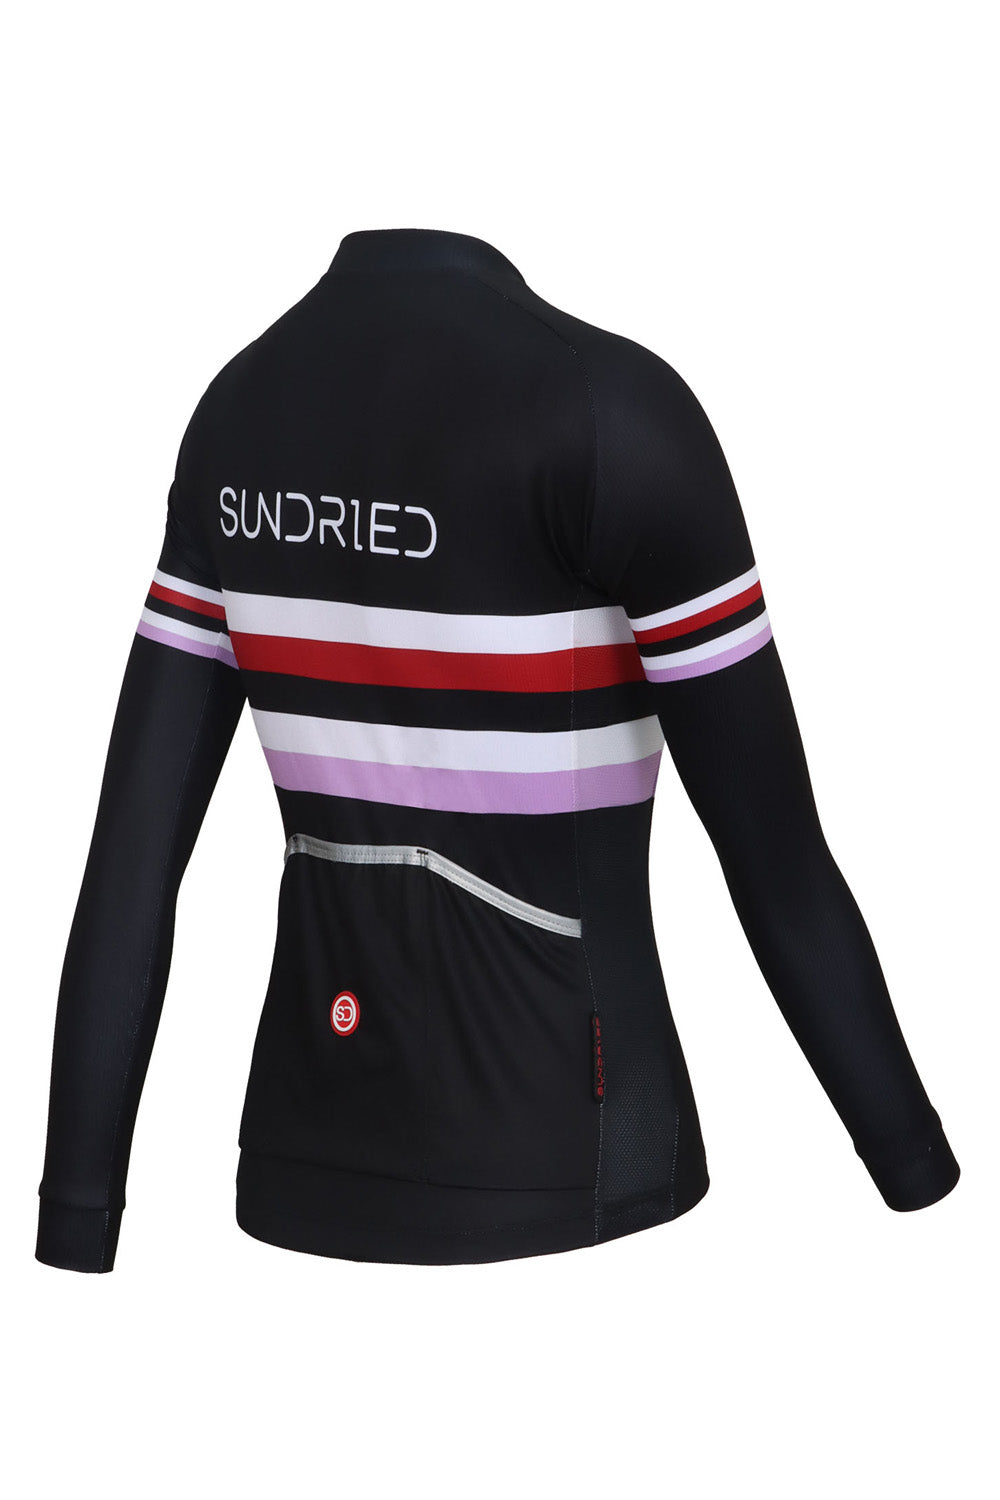 Sundried Stealth Women's Long Sleeved Cycle Training Jersey Long Sleeve Jersey Activewear